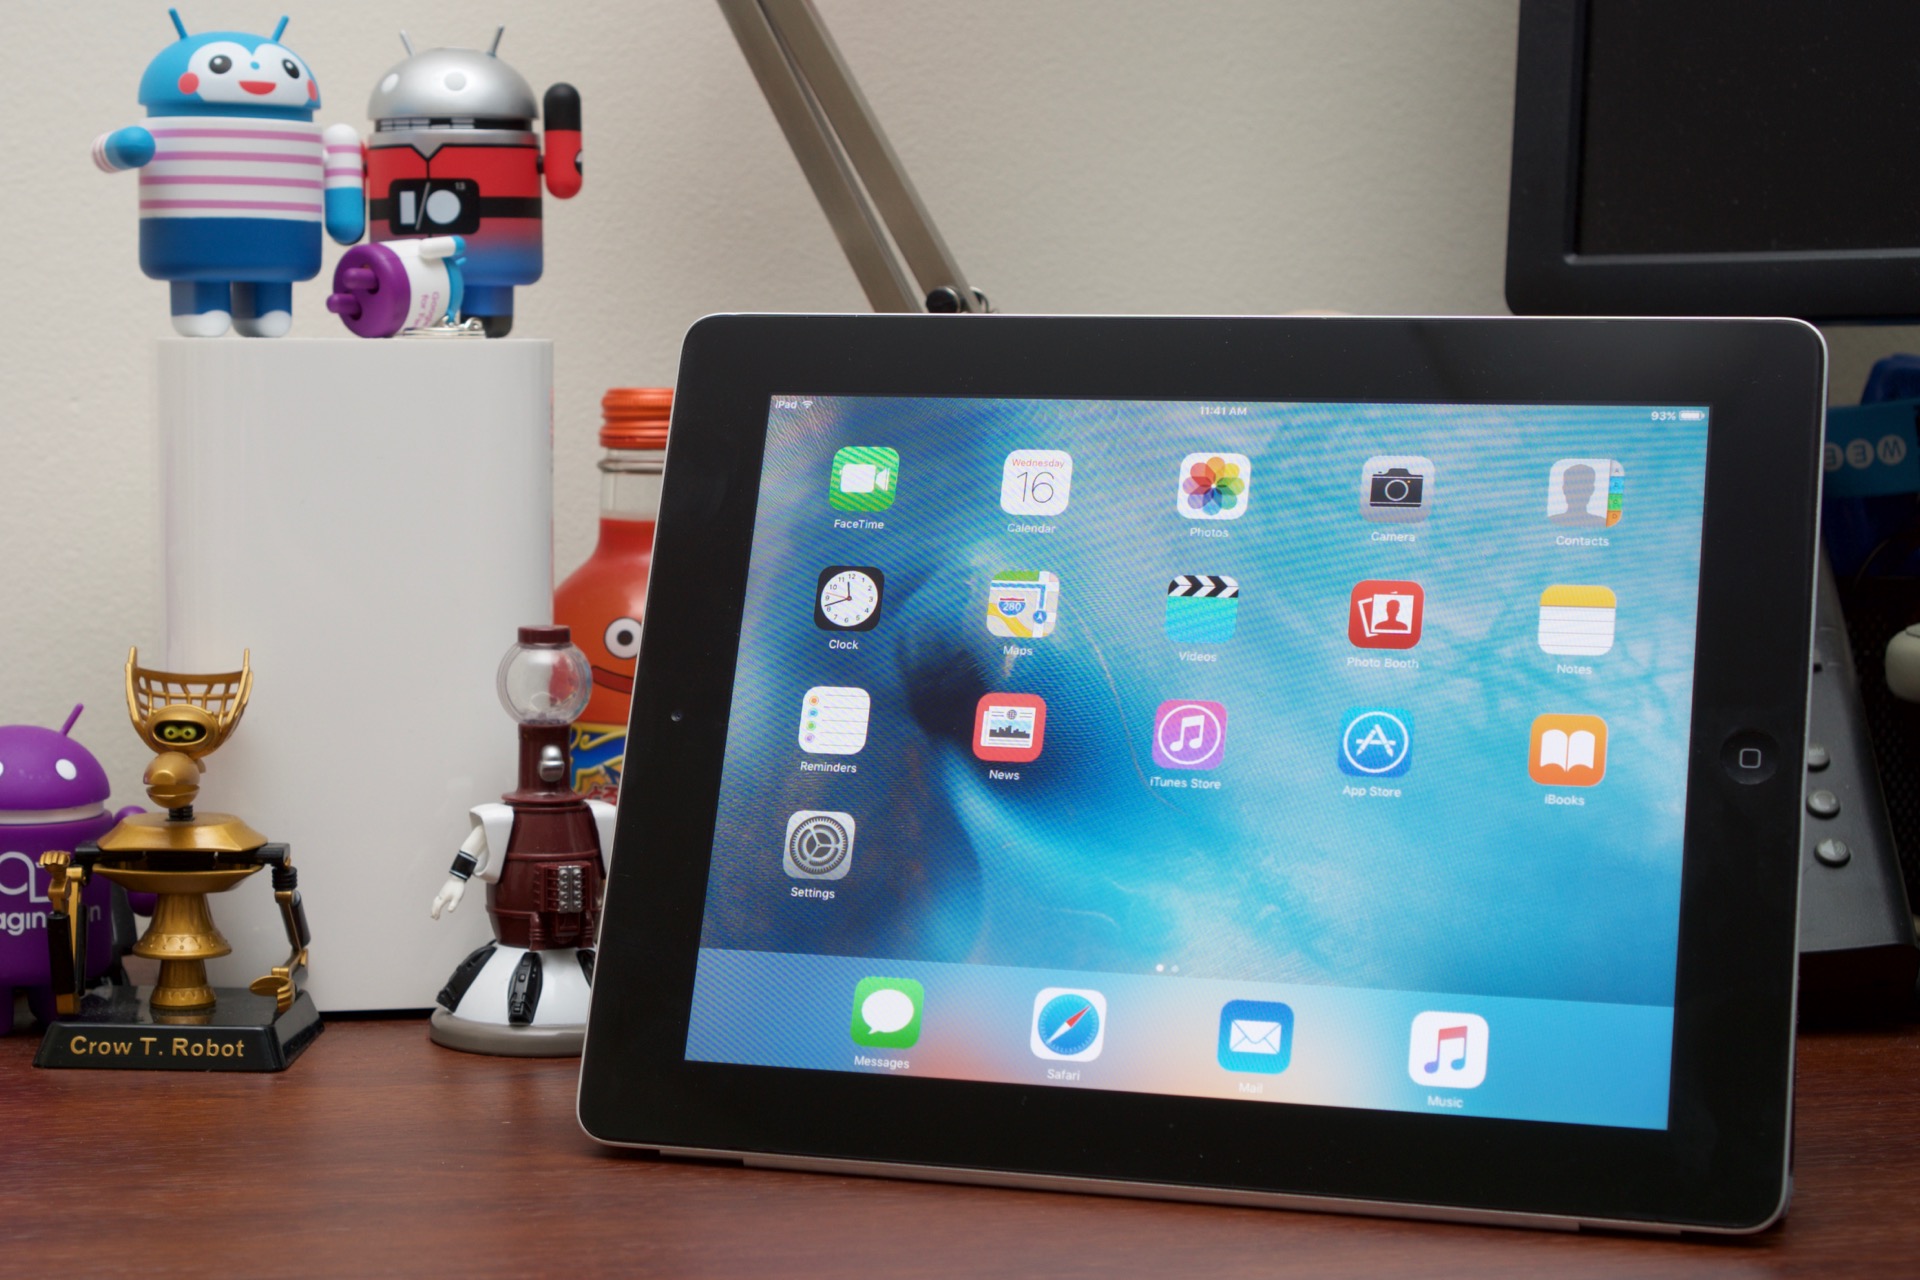 iOS 9 on the iPad 2: Not worse than iOS 8, but missing many ...